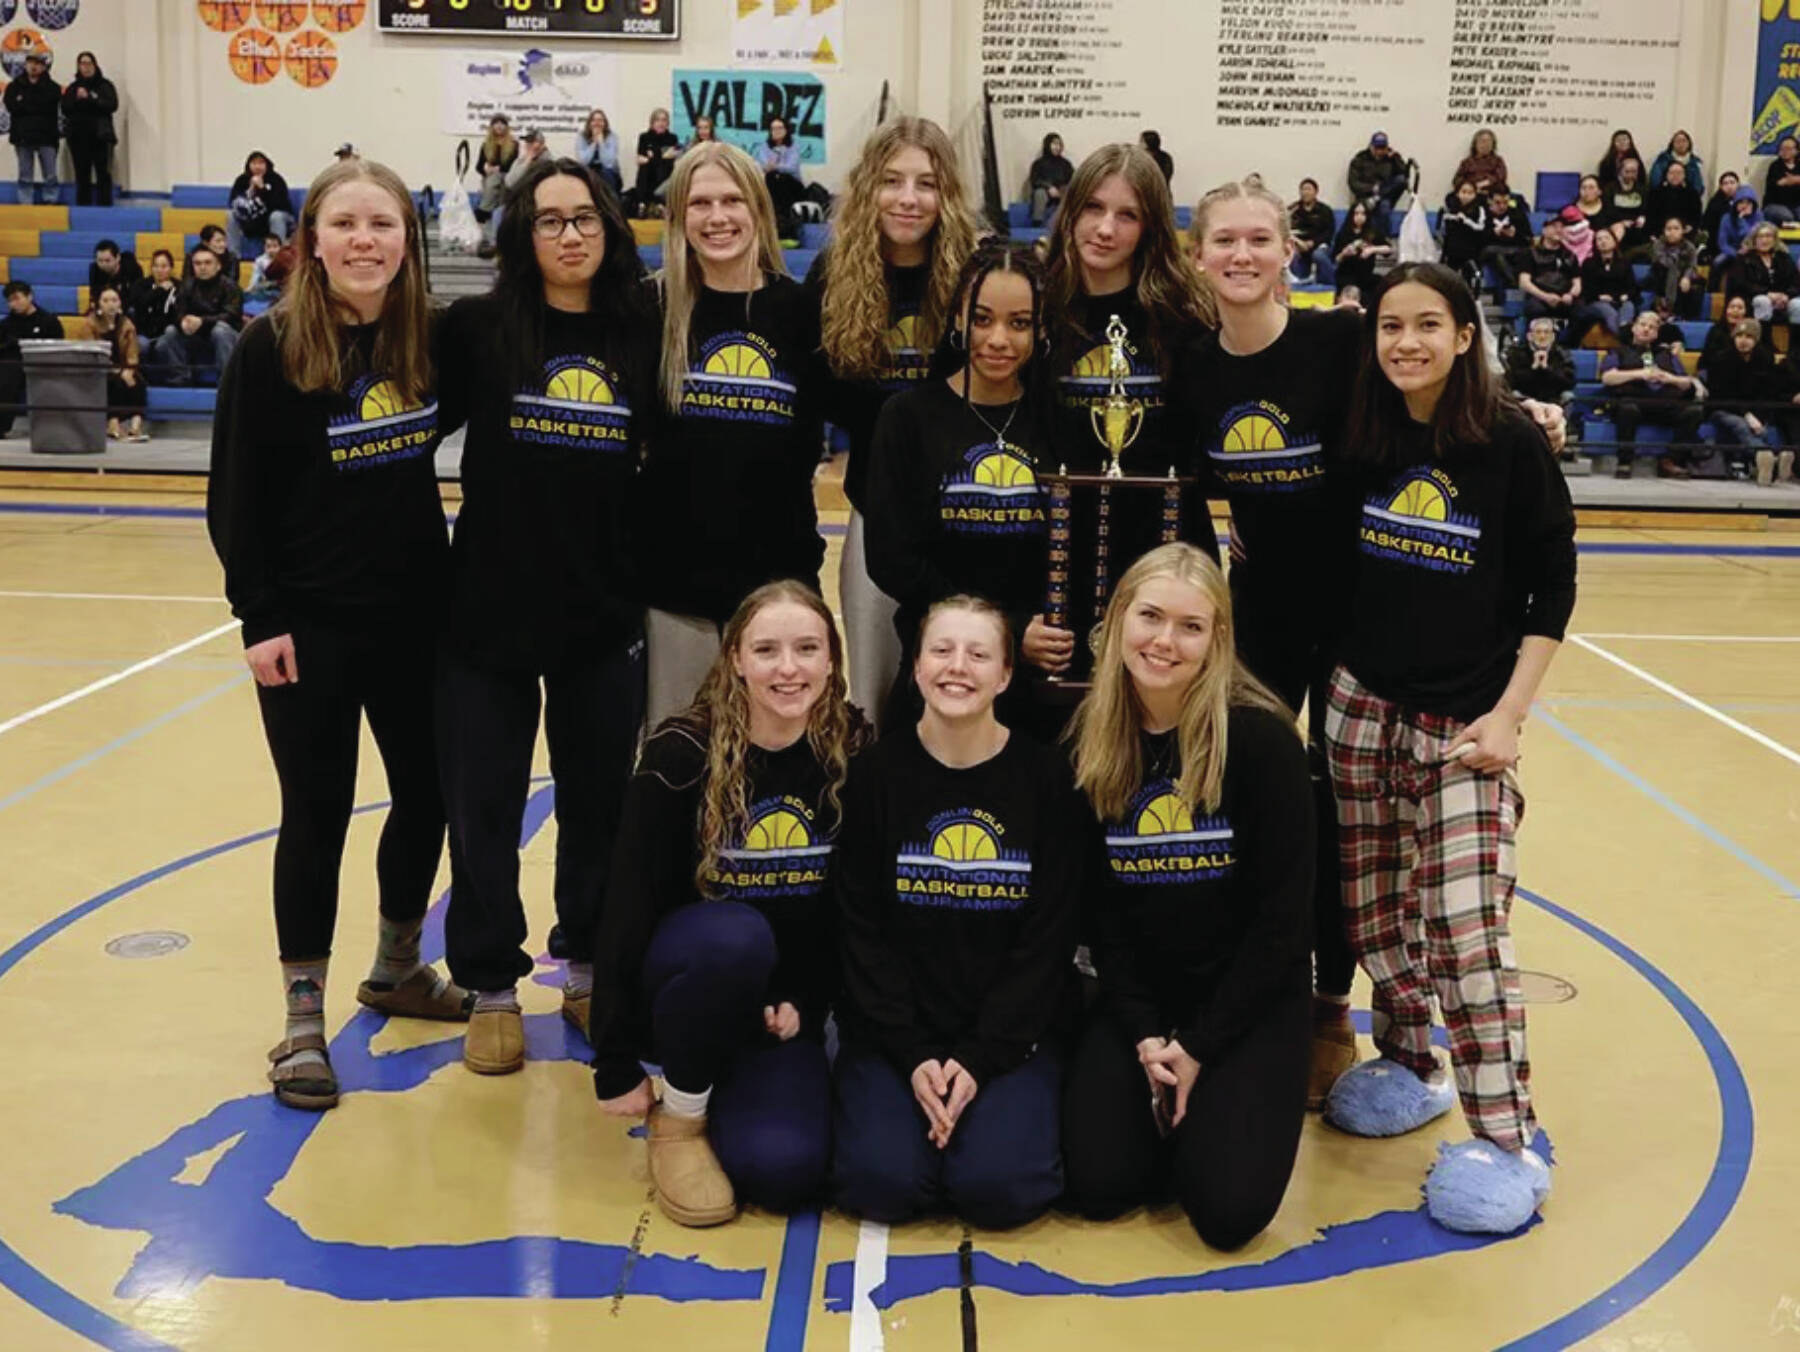 Photo provided by Coach Dan Miotke
Homer Lady Mariners win first place trophy at Donlin Gold high school basketball tournament in Bethel, Alaska January 18-20.